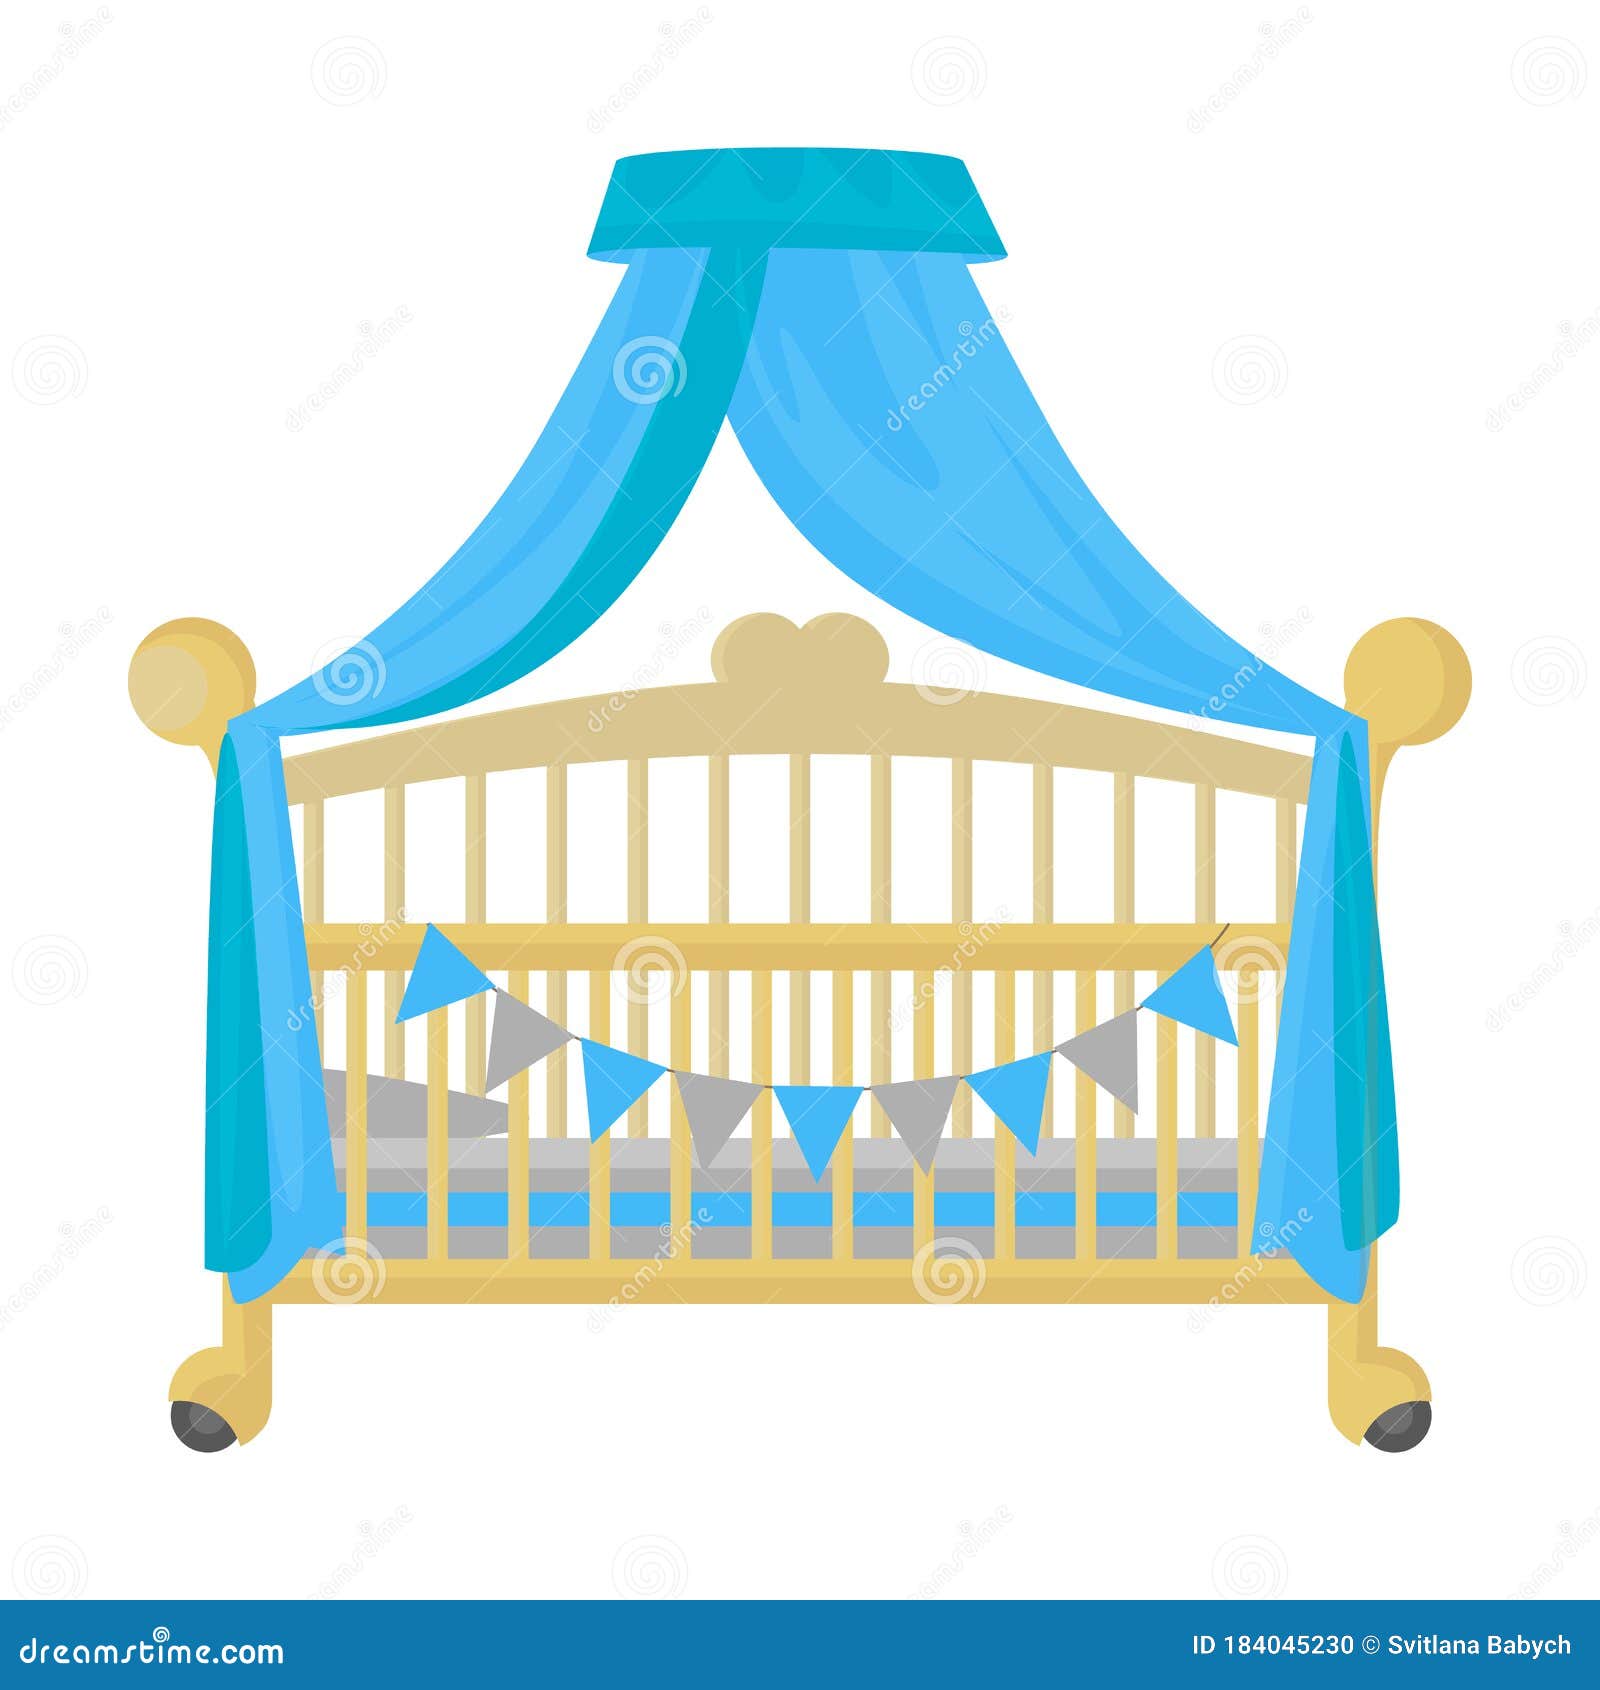 Crib Vector  Vector Icon Isolated on White Background Crib.  Stock Vector - Illustration of furniture, childhood: 184045230